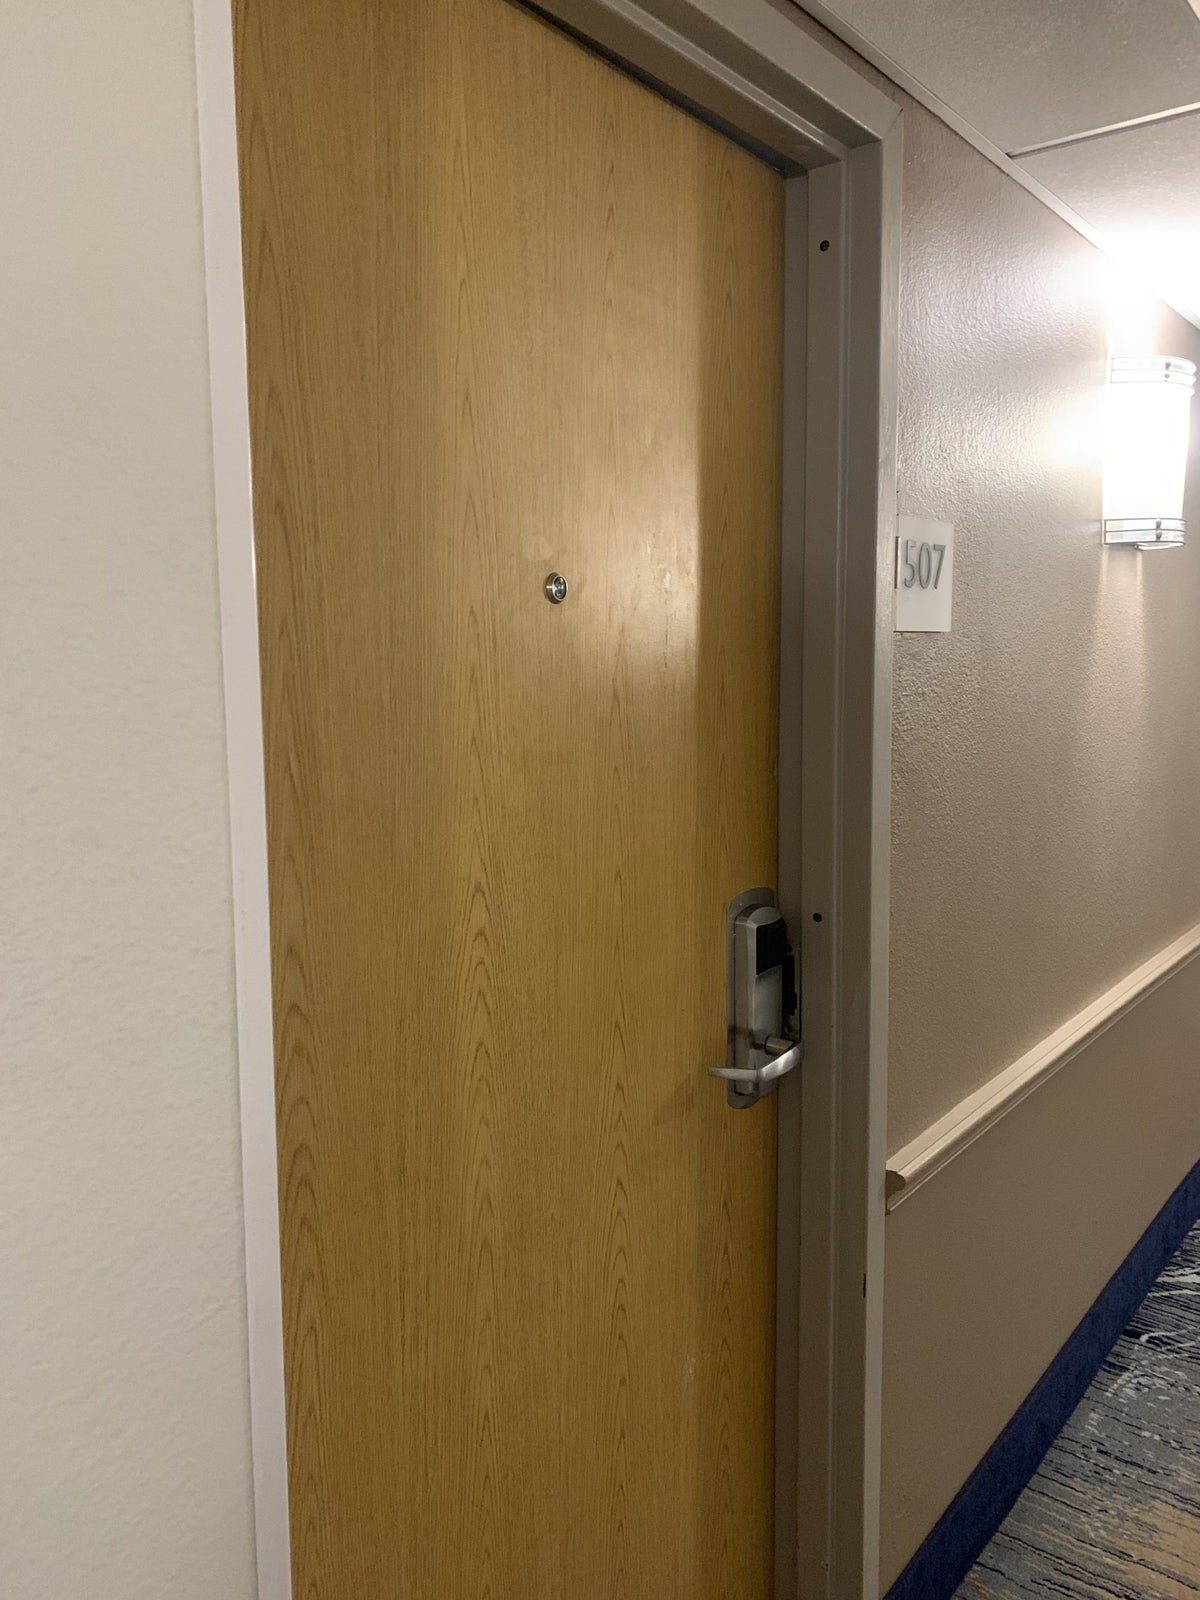 Unlatched room doors at the DoubleTree by Hilton Corpus Christi Beachfront